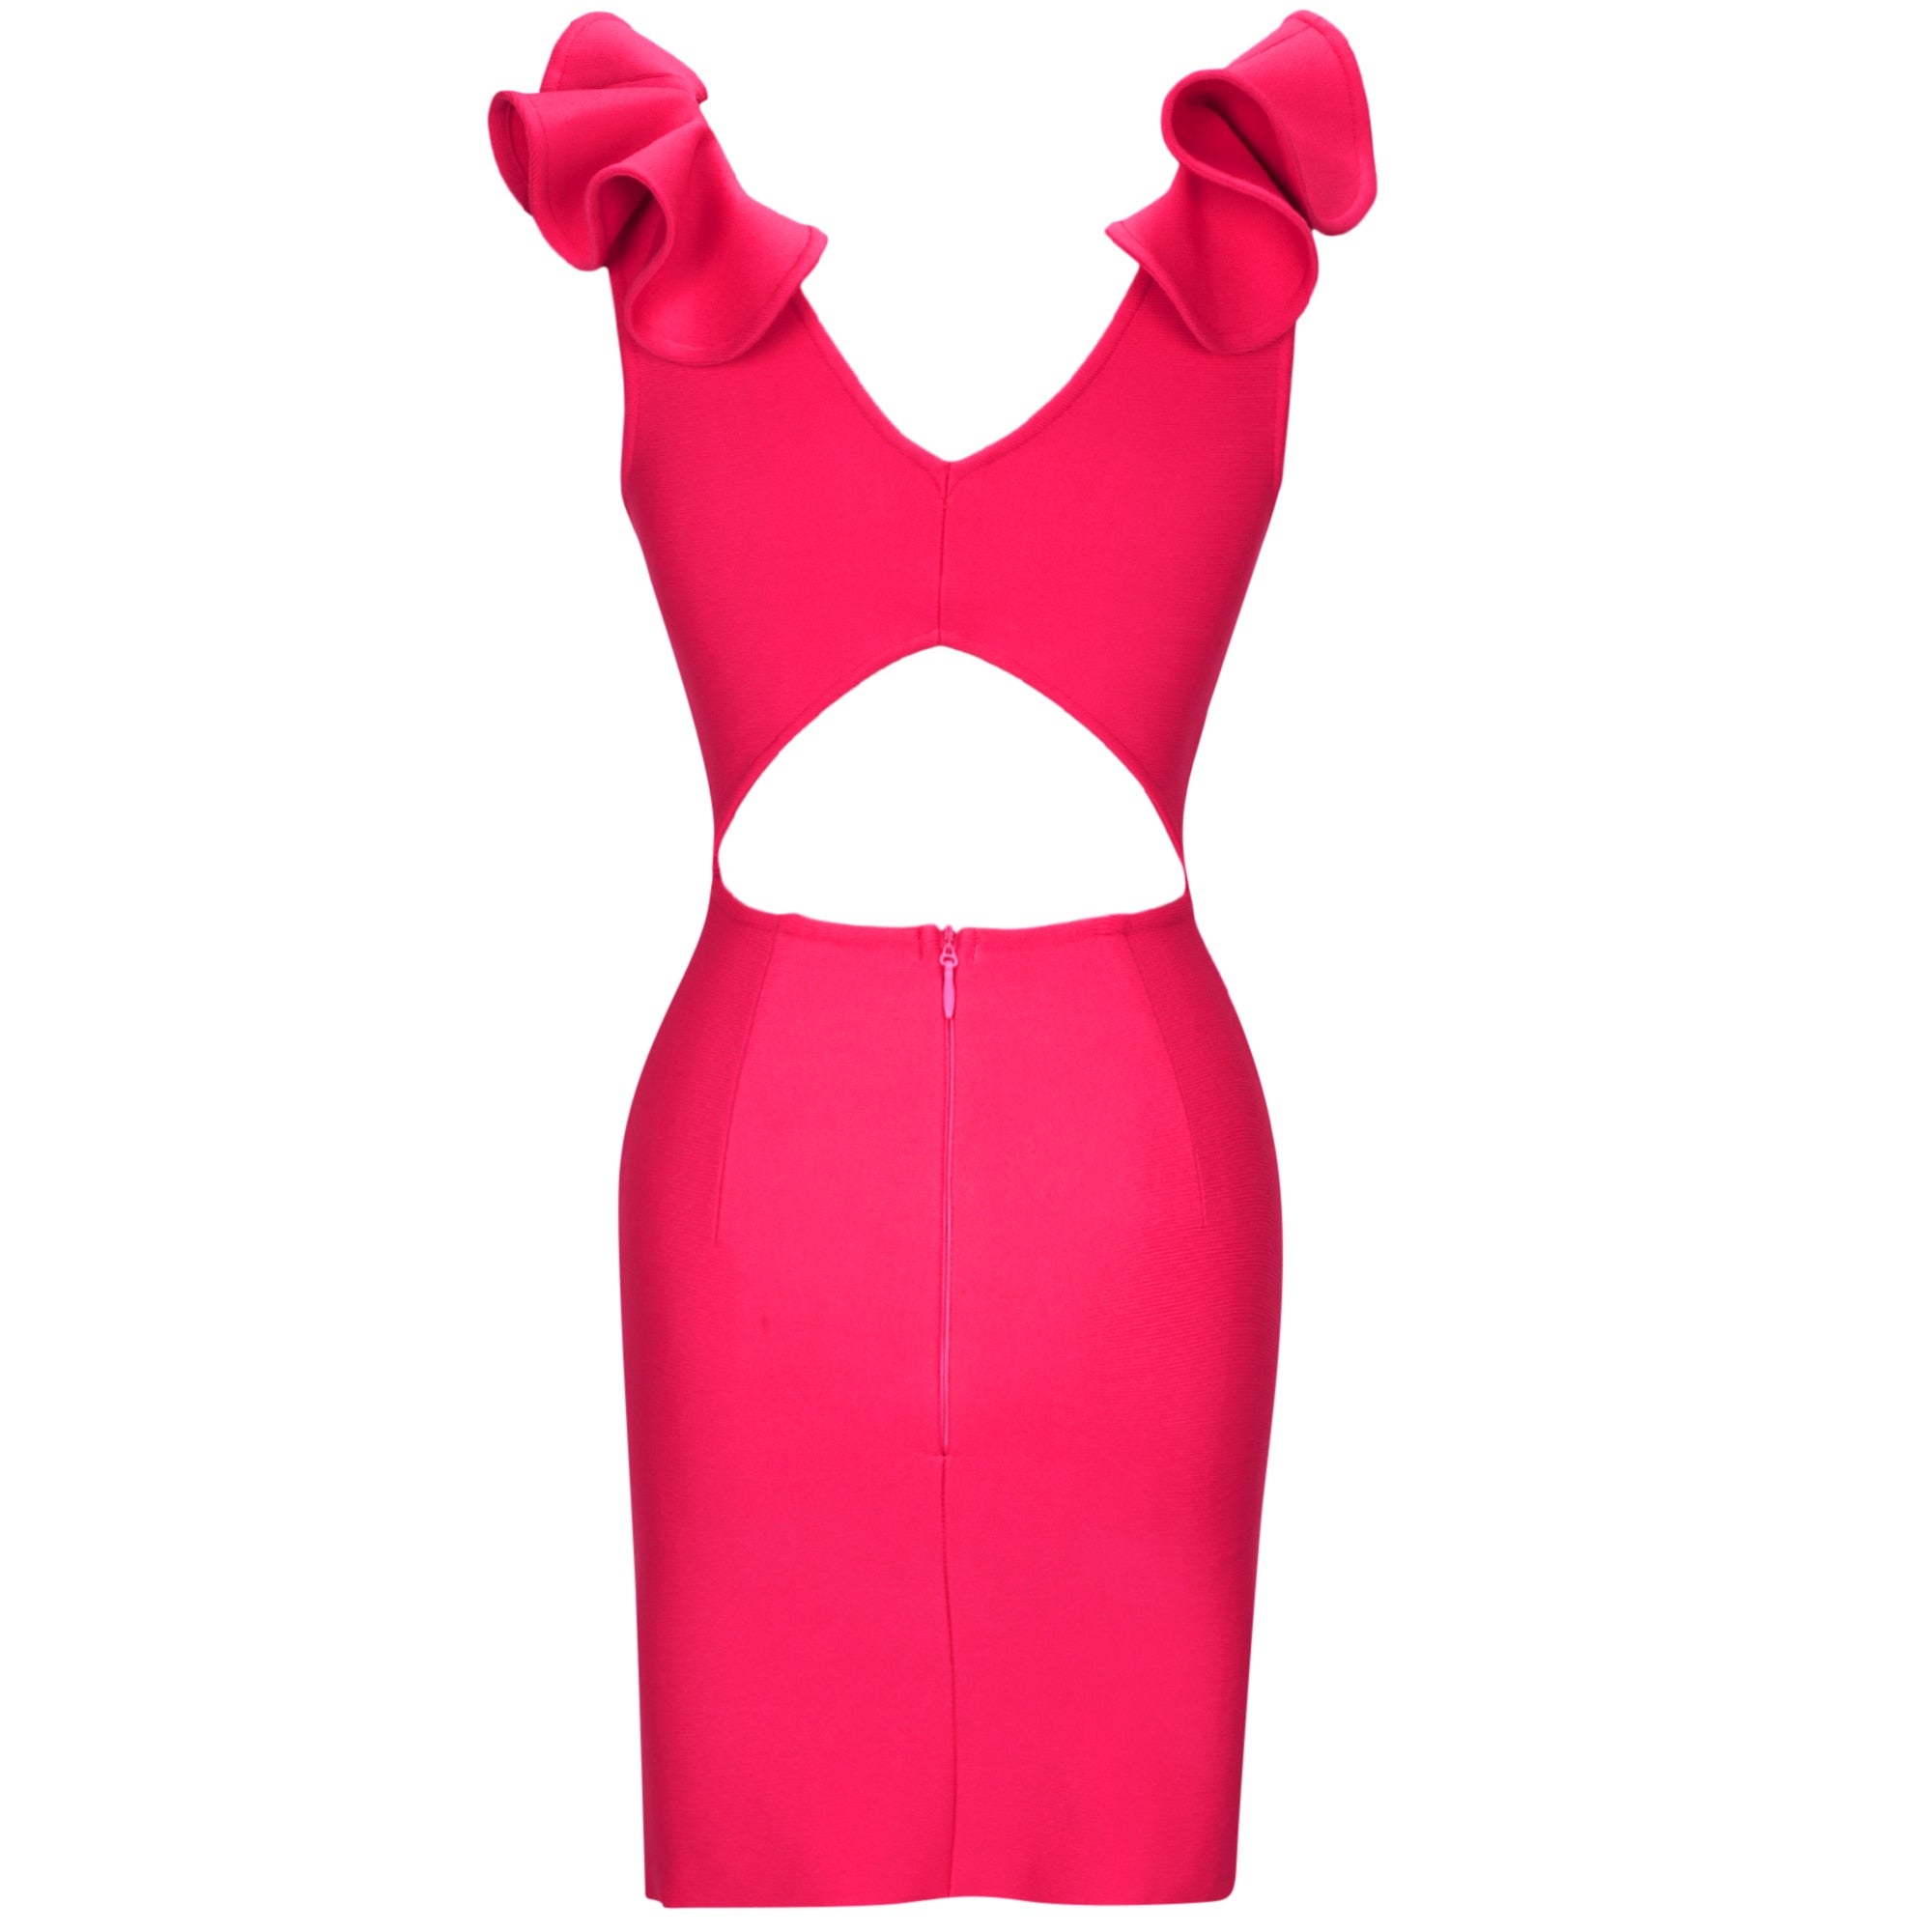 Bandage Dress 2021 New Arrival Summer Pink Bandage Dress Bodycon Women Ruffles Sexy Party Dress Evening Club Birthday Outfits